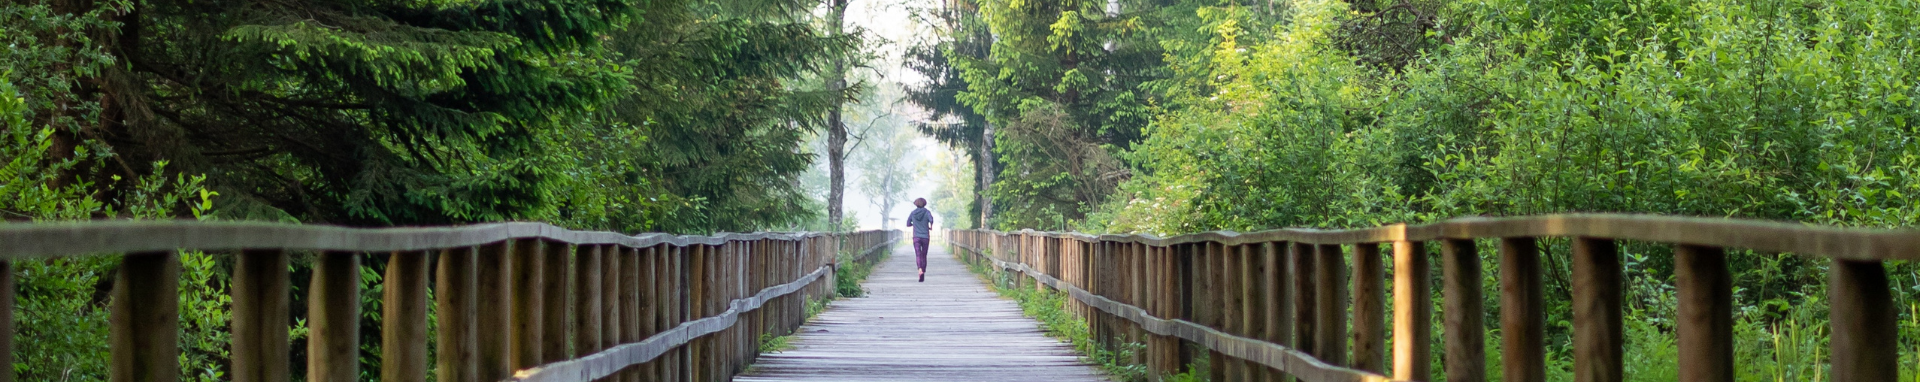 person running on bridge surrounded by trees